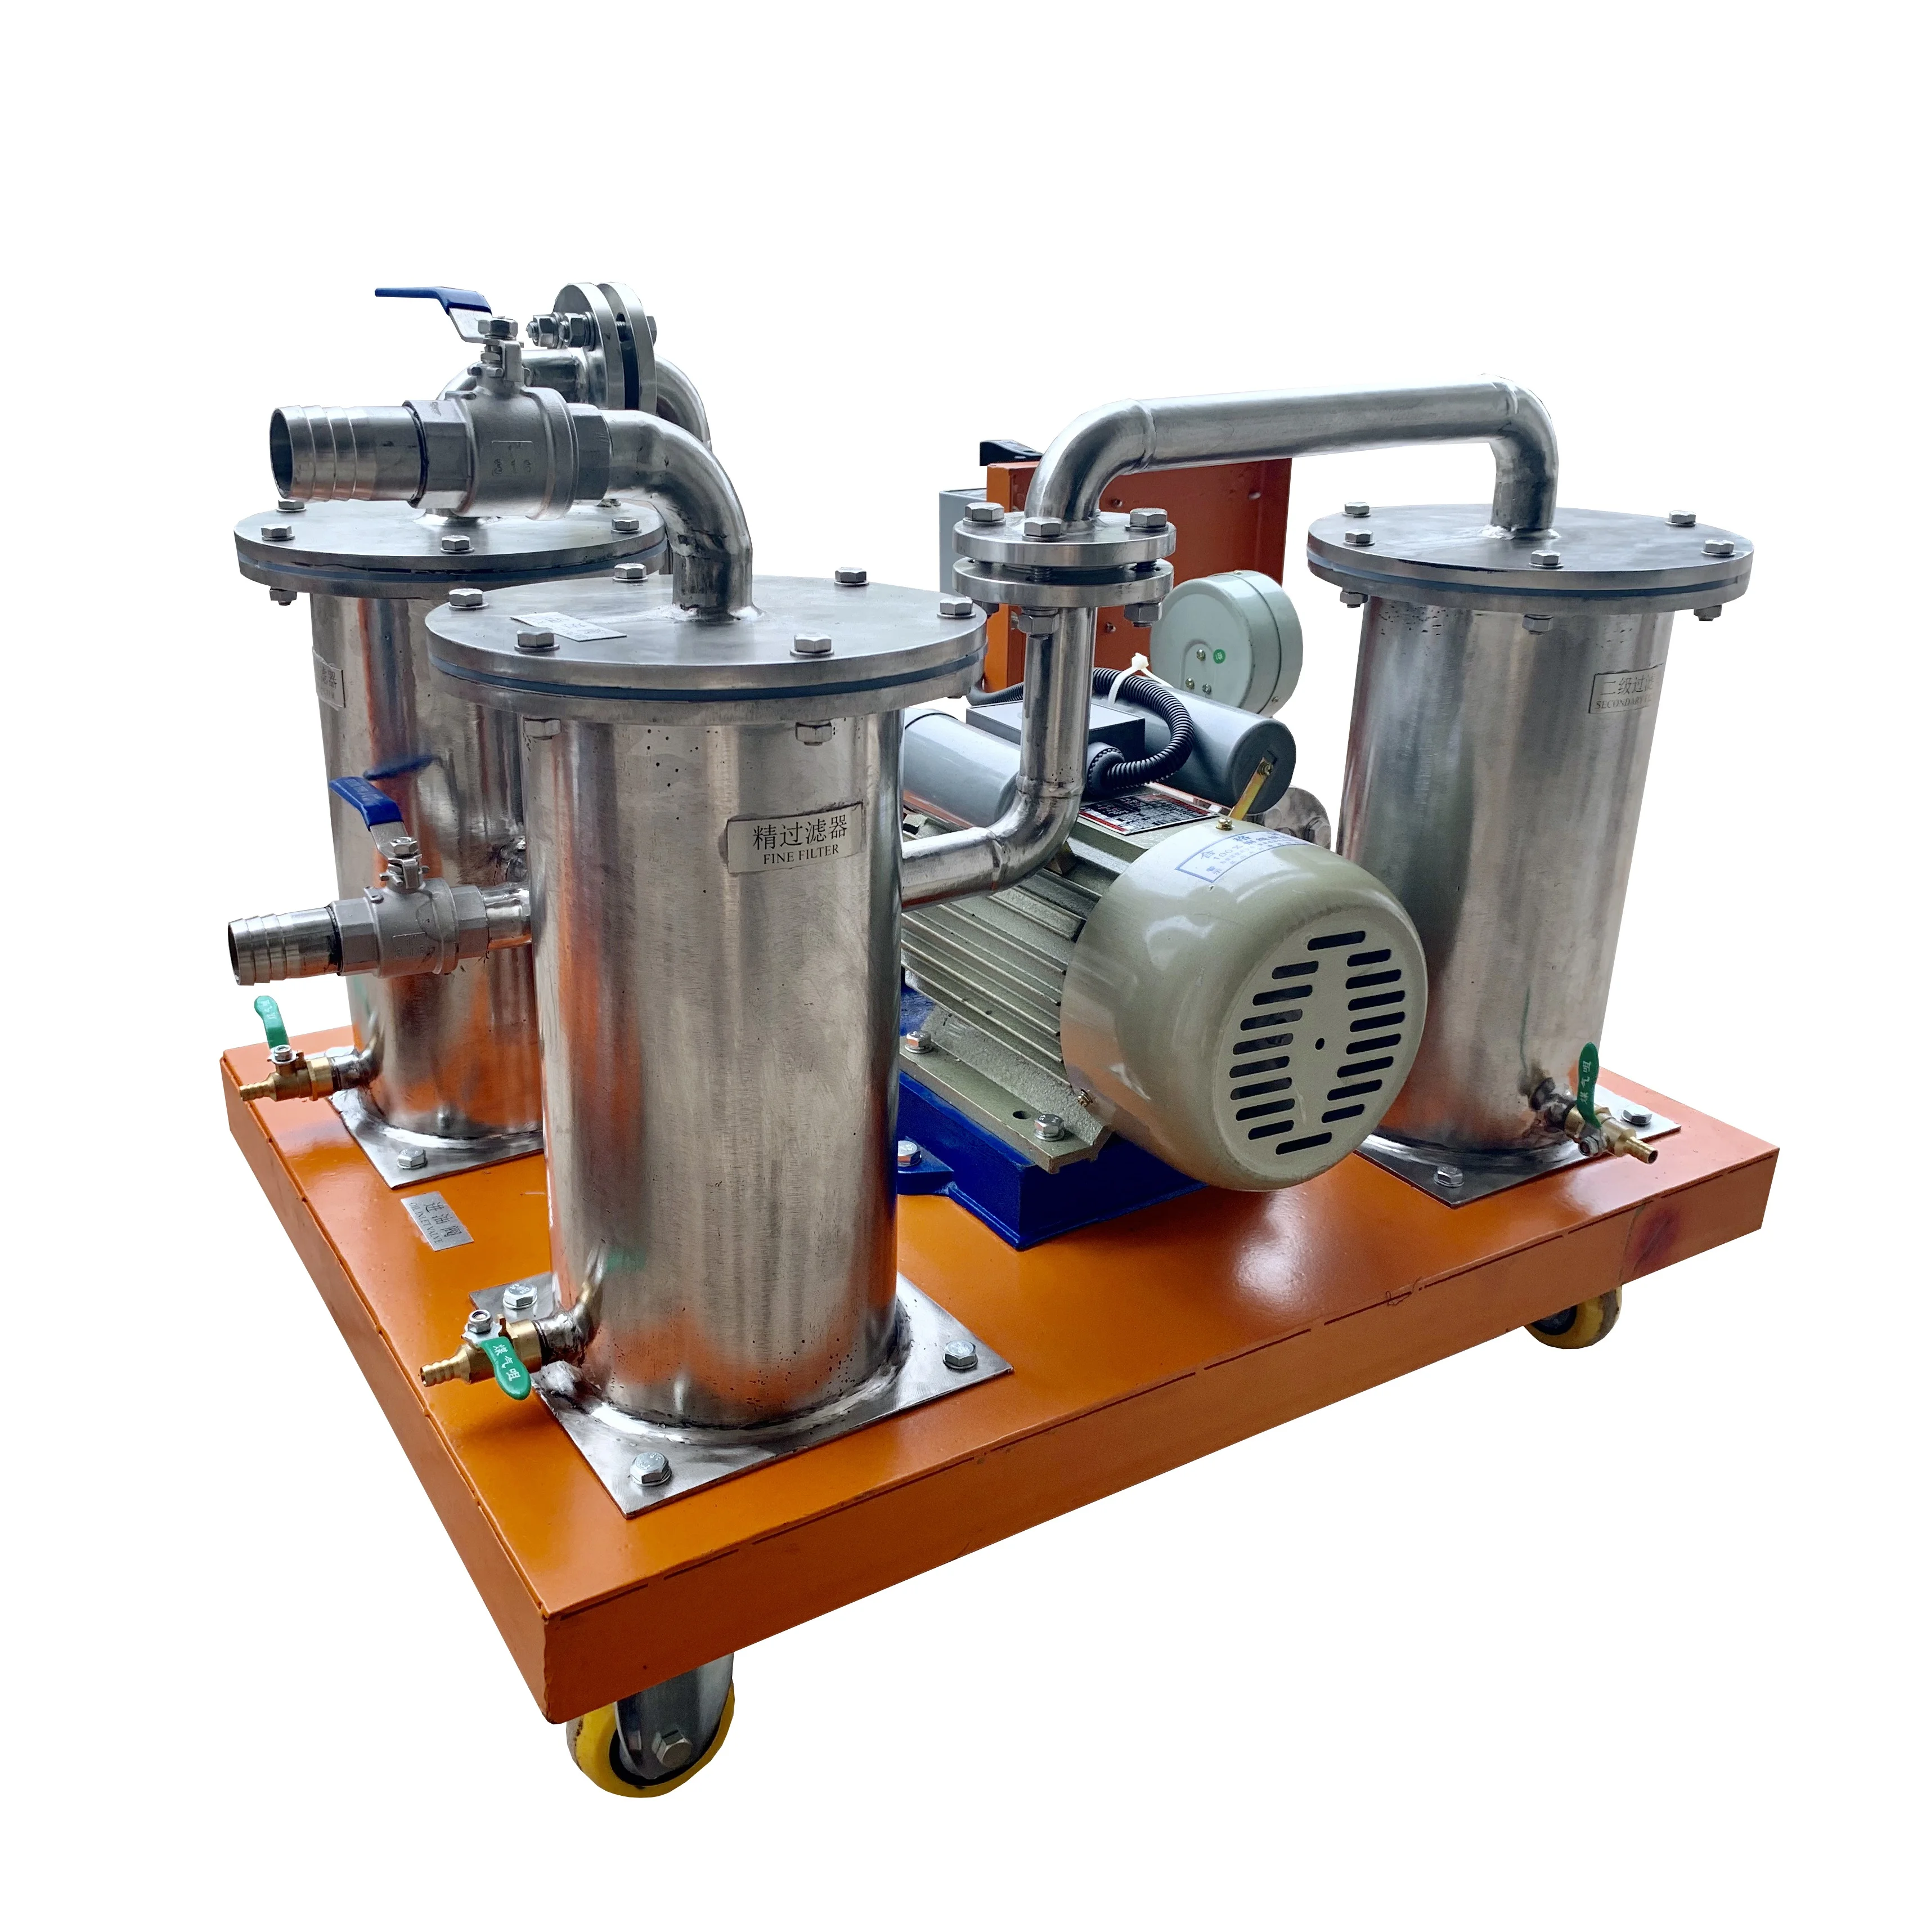 Pacific nut district Portable Virgin Coconut Oil Centrifuge Machine/oil Filter Equipment - Buy  Virgin Coconut Oil Centrifuge Machine,Dr Doc Martens,Edible Oil Filter  Product on Alibaba.com